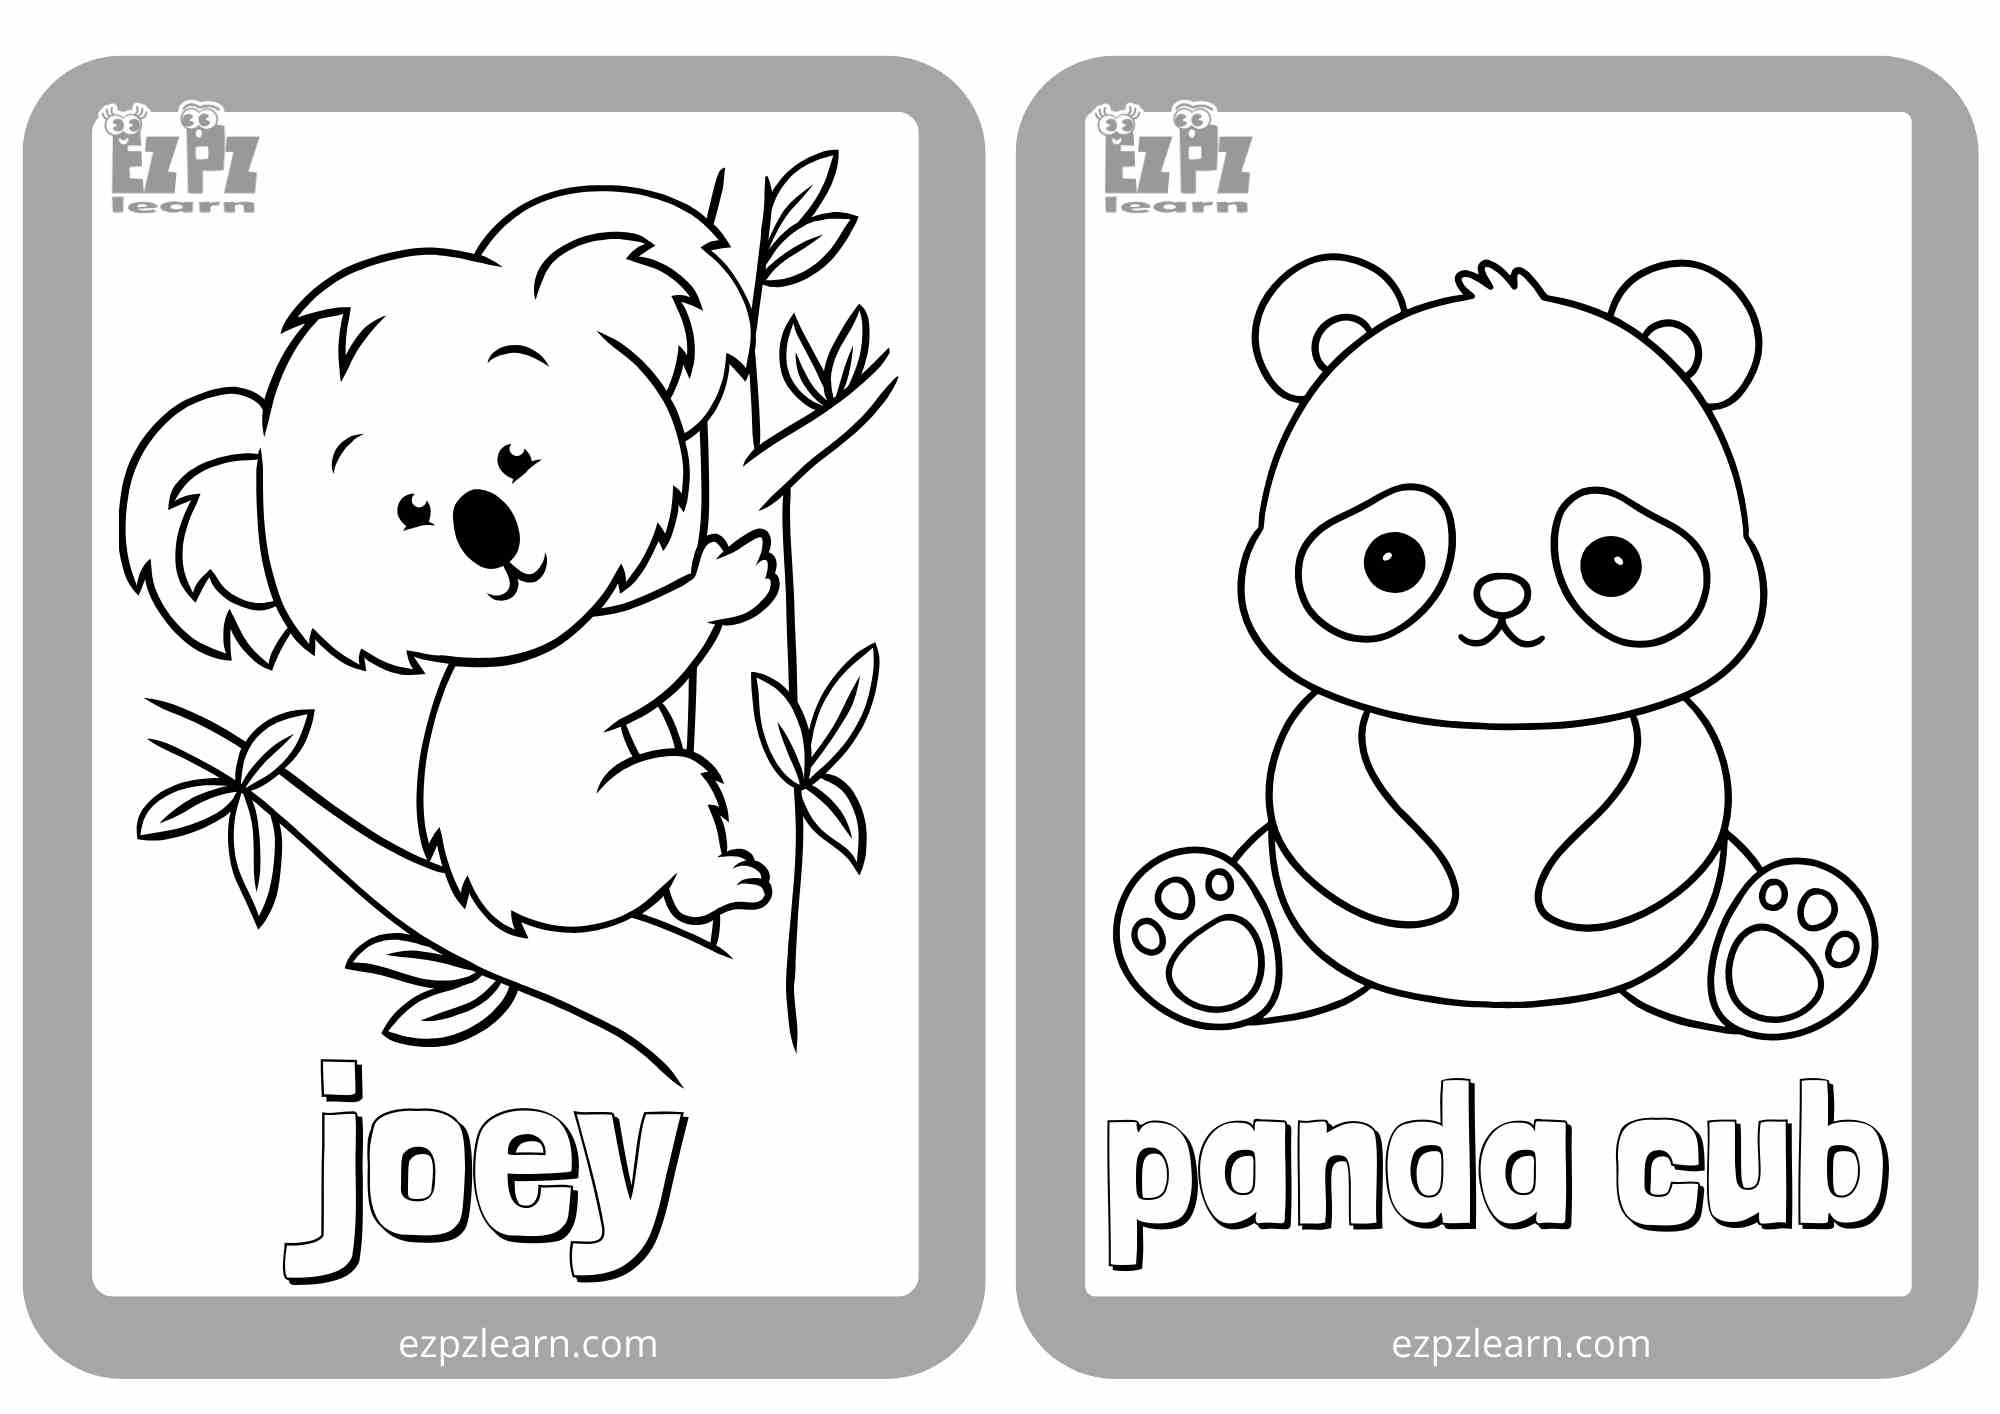 https://ezpzlearn.com/CMS/Content/Coloring%20Pages/Animals%20Farm/Baby%20Animals%20Coloring/baby%20animals%20coloring%20mini%20flashcards%20joey%20and%20panda%20cub.jpg